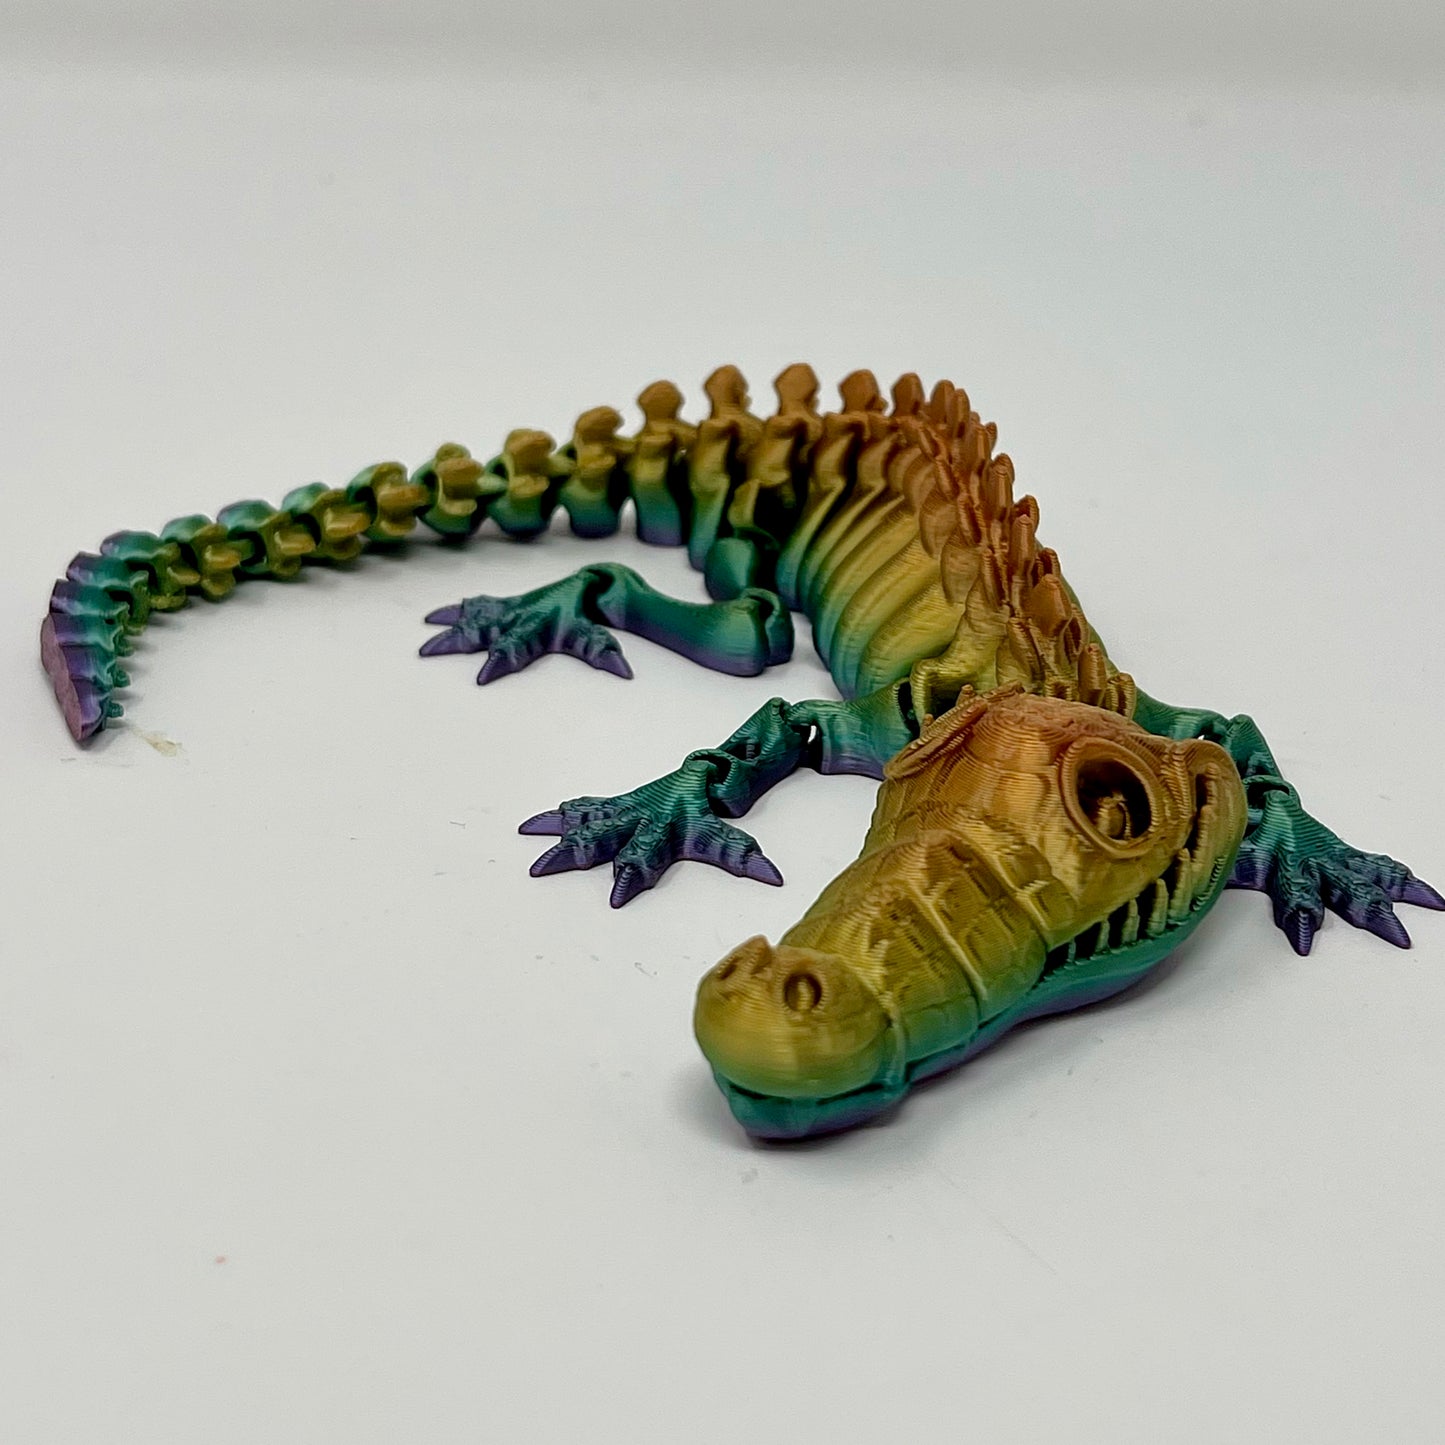 3D Printed Articulated Crocodile